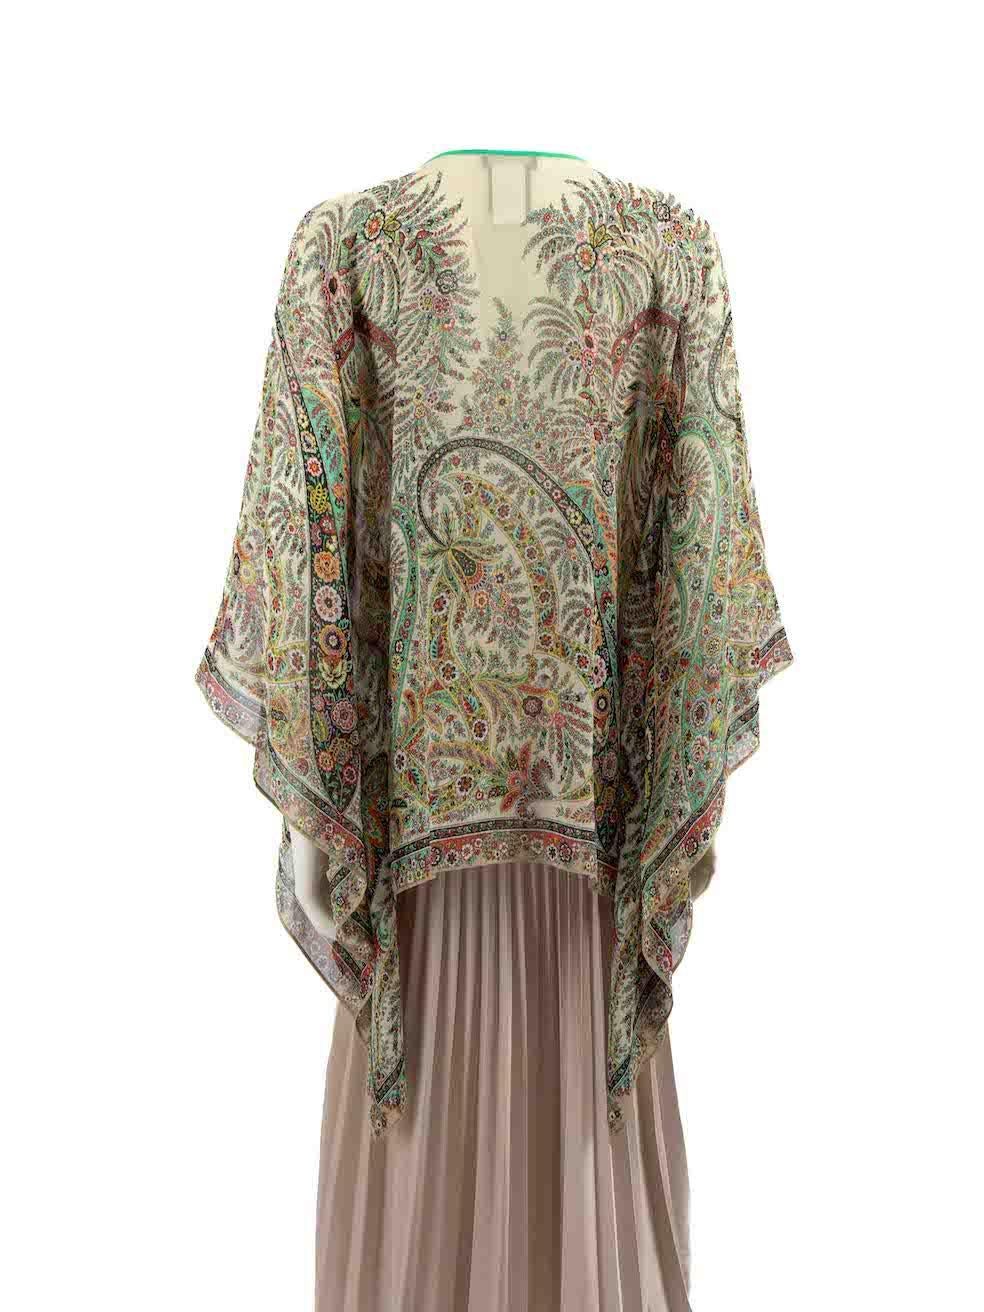 Etro Green Silk Floral Pattern Tassel Accent Top Size M In Excellent Condition For Sale In London, GB